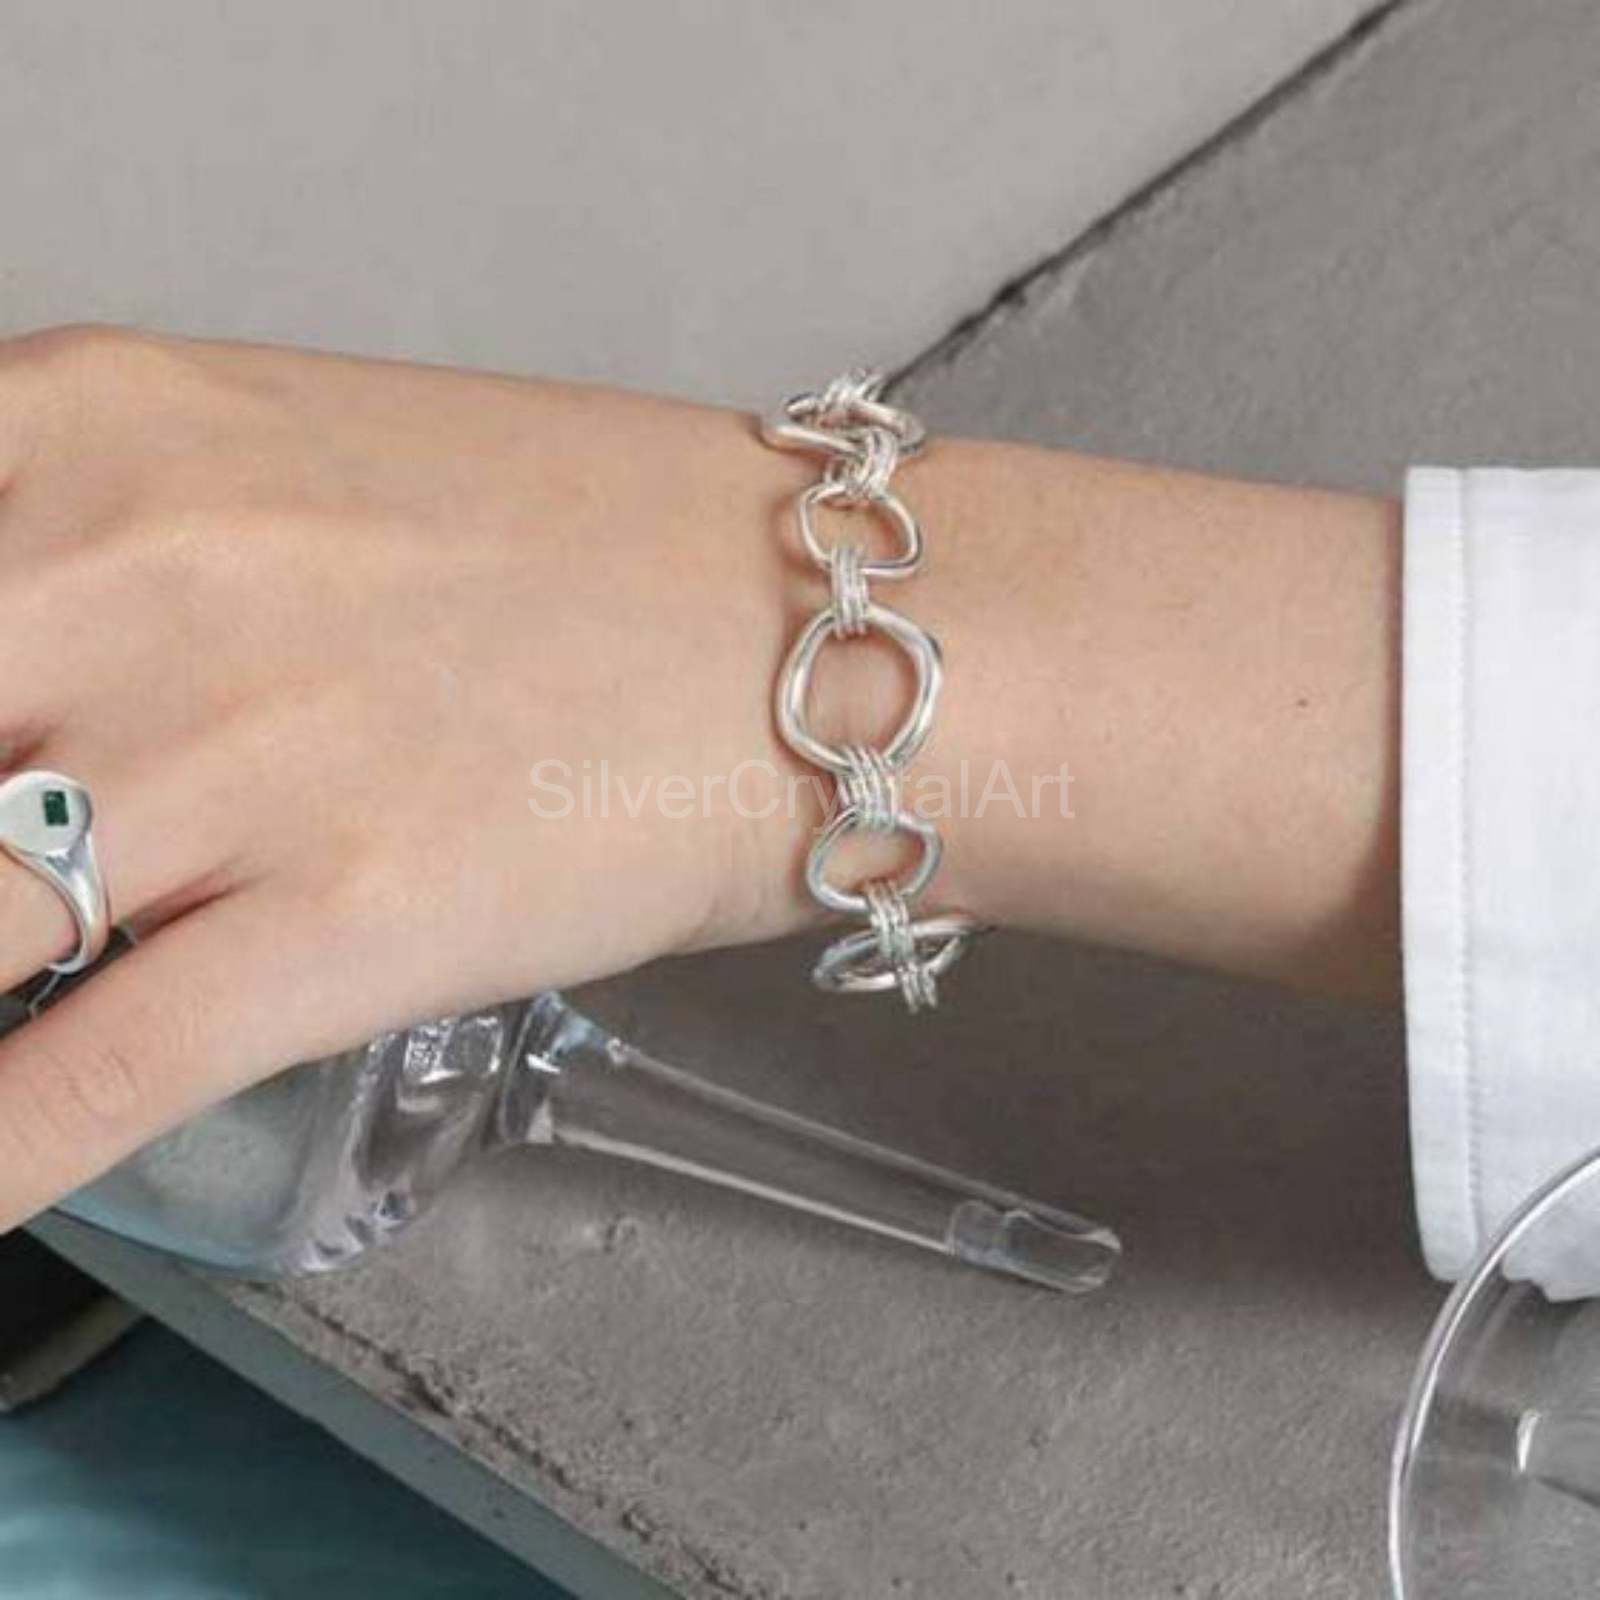 New Hollow Chain 925 Sterling Silver Bracelet